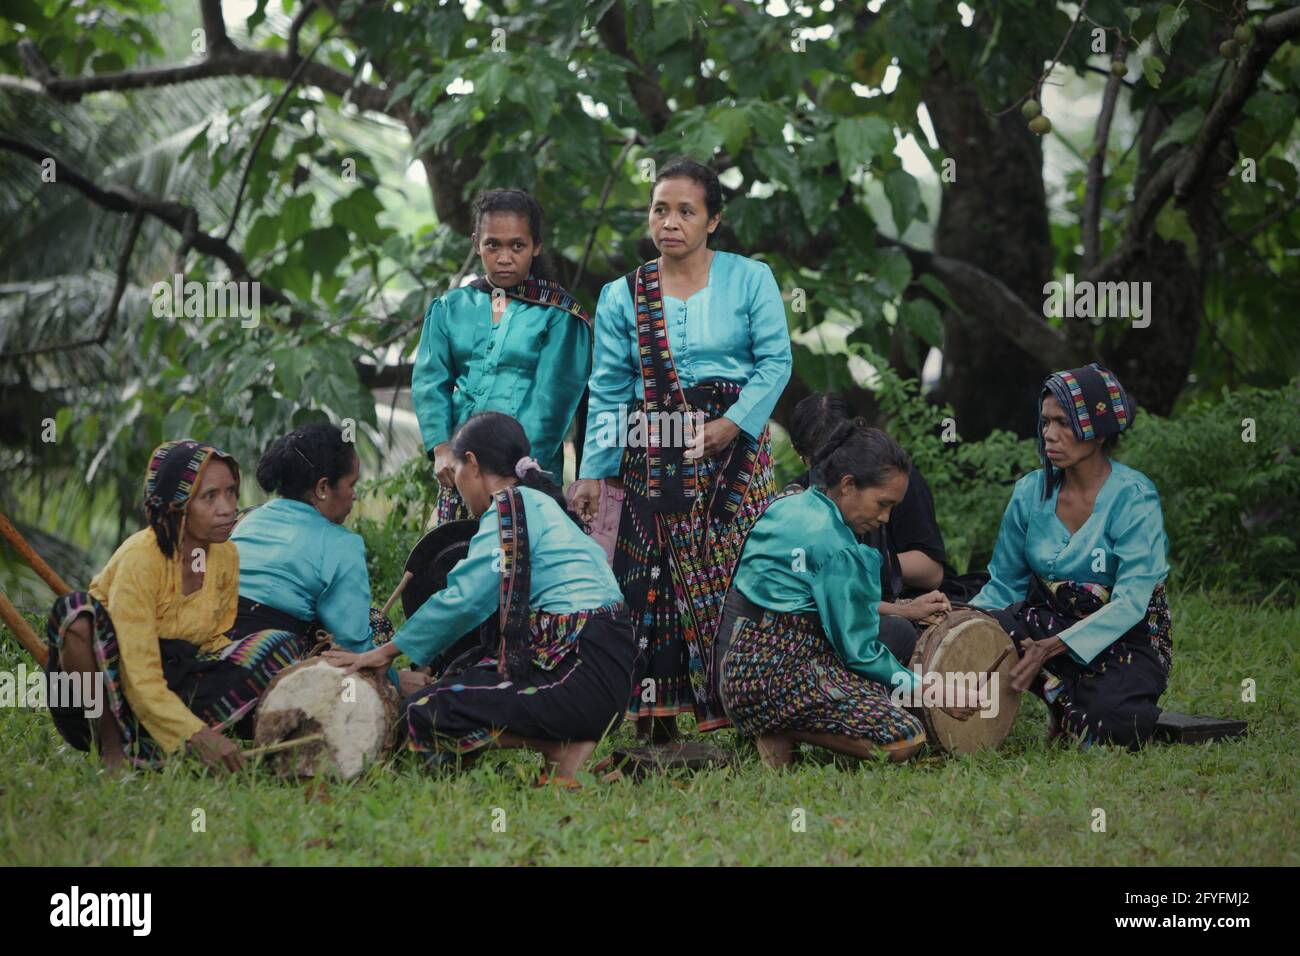 Women playing percussive instruments as musical background for a show of "caci" (Flores Island's traditional whip fight, martial art) in Liang Ndara village, Mbeliling, West Manggarai, Flores, East Nusa Tenggara, Indonesia. Stock Photo